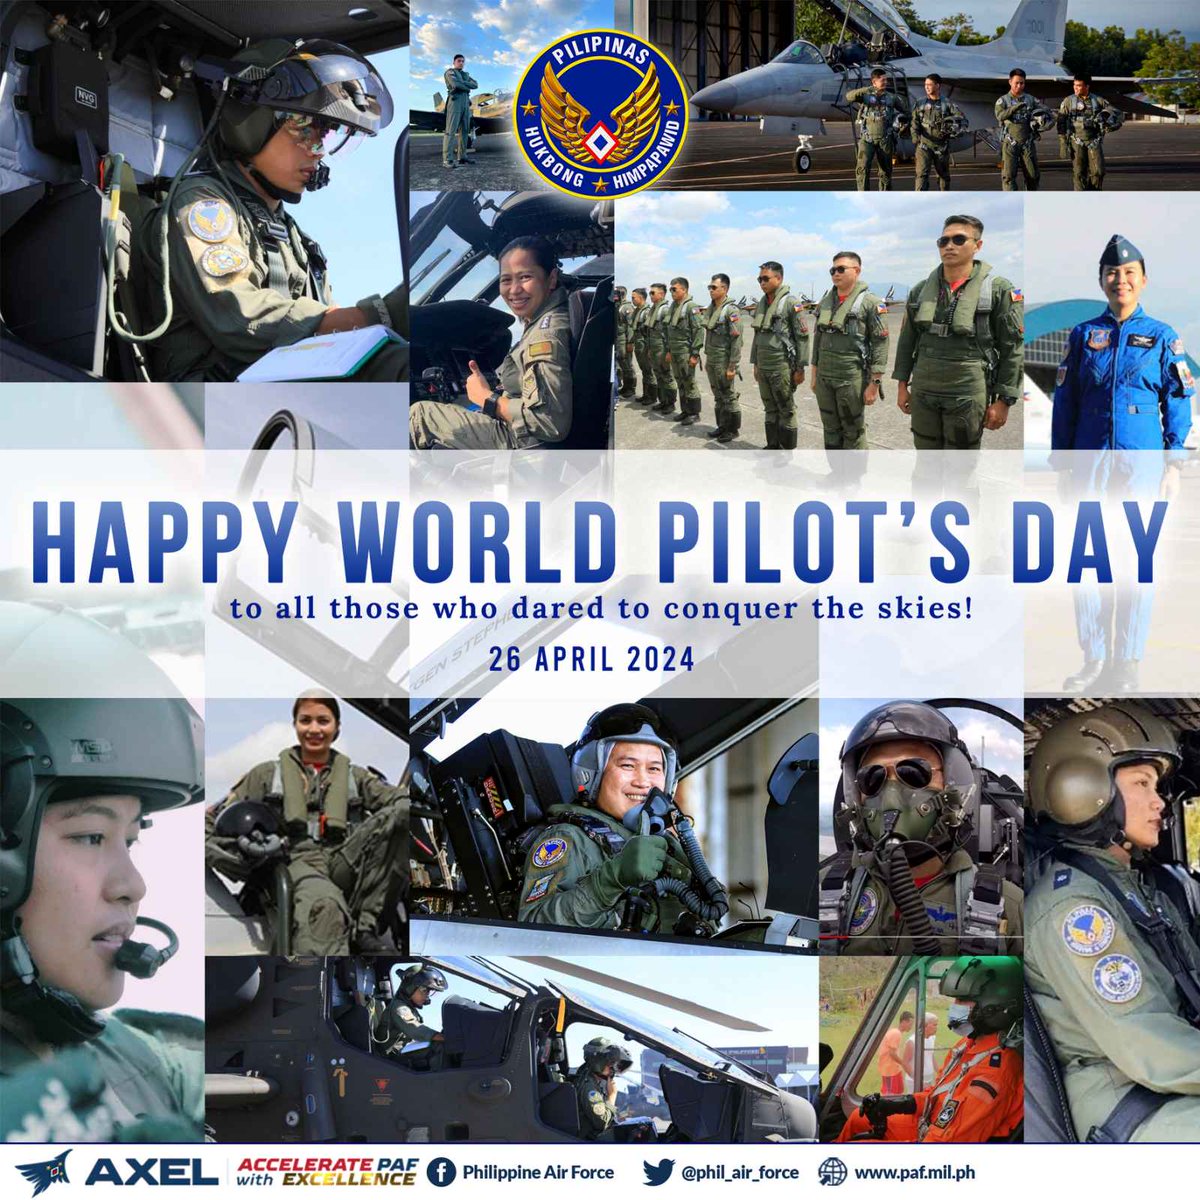 Soaring high with pride, the Philippine Air Force joins the world in celebrating World Pilots' Day, recognizing the unwavering spirit and exceptional skills of all aviators.

#AcceleratewithExcellence #GuardiansofourPreciousSkies #PAFyoucanTrust #AFPyoucanTRUST